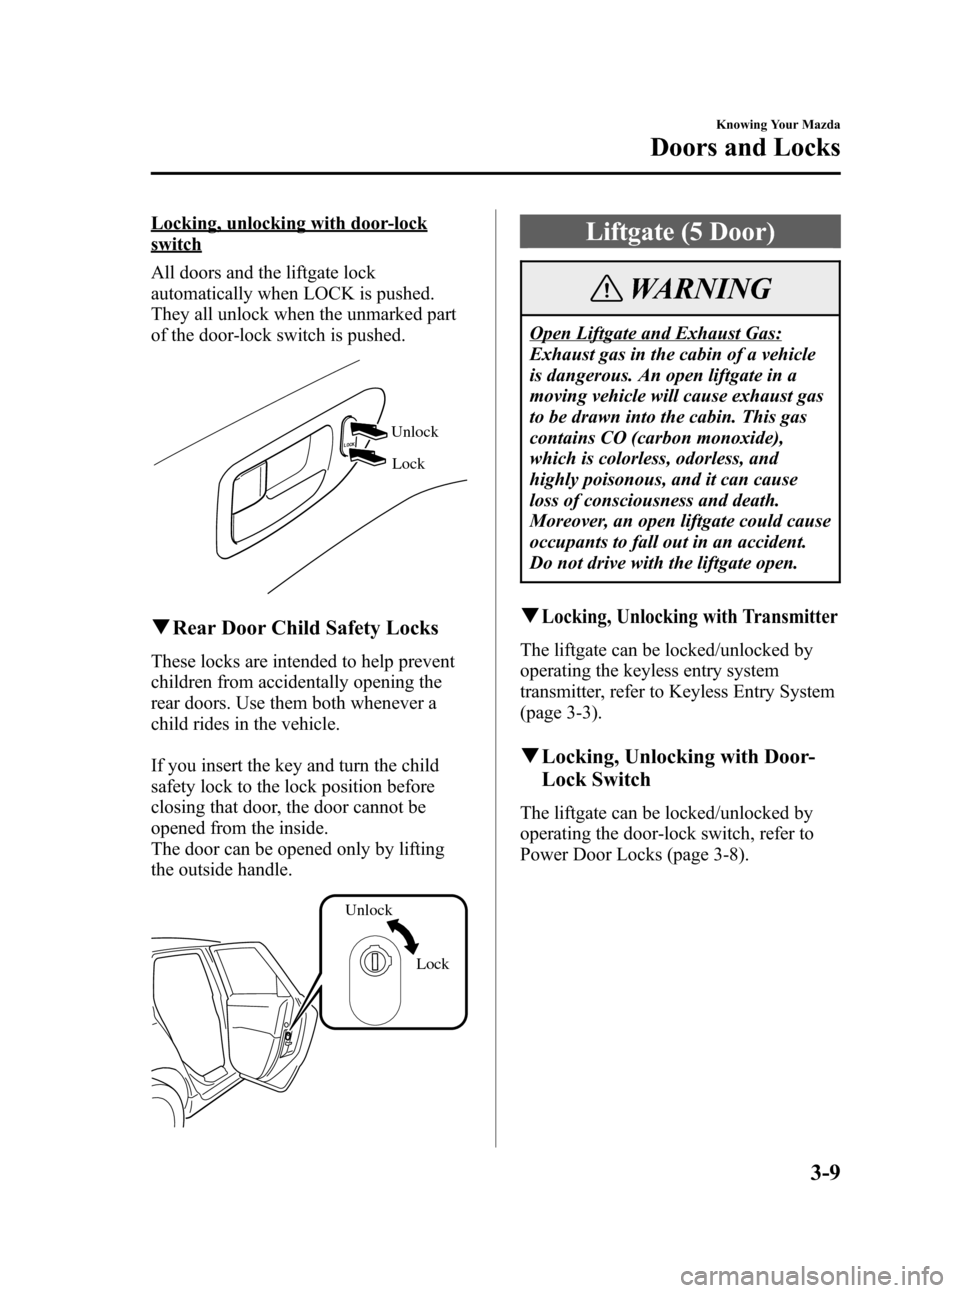 MAZDA MODEL 3 HATCHBACK 2006   (in English) Manual PDF Black plate (79,1)
Locking, unlocking with door-lock
switch
All doors and the liftgate lock
automatically when LOCK is pushed.
They all unlock when the unmarked part
of the door-lock switch is pushed.